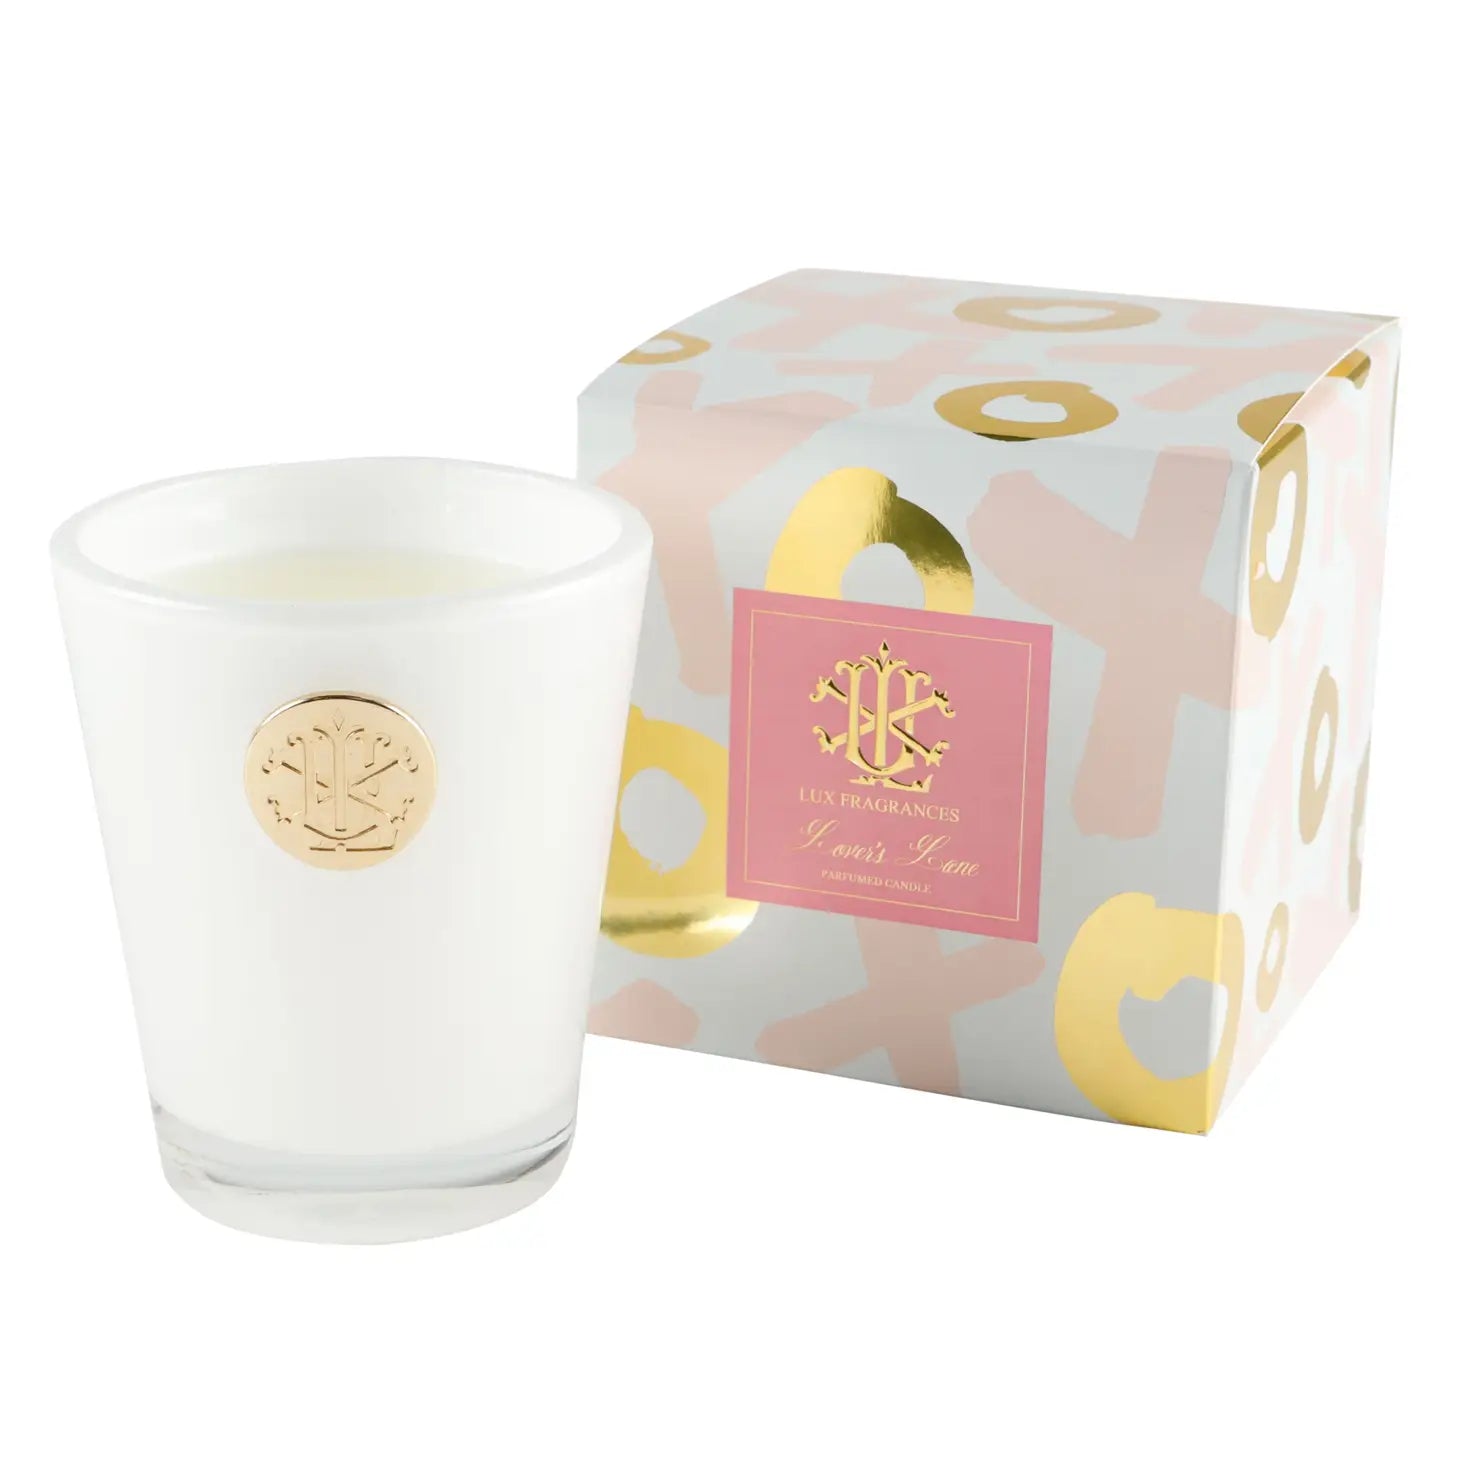 Lux Fragrances Lover's Lane - Designer Box 8 oz Candle available at The Good Life Boutique